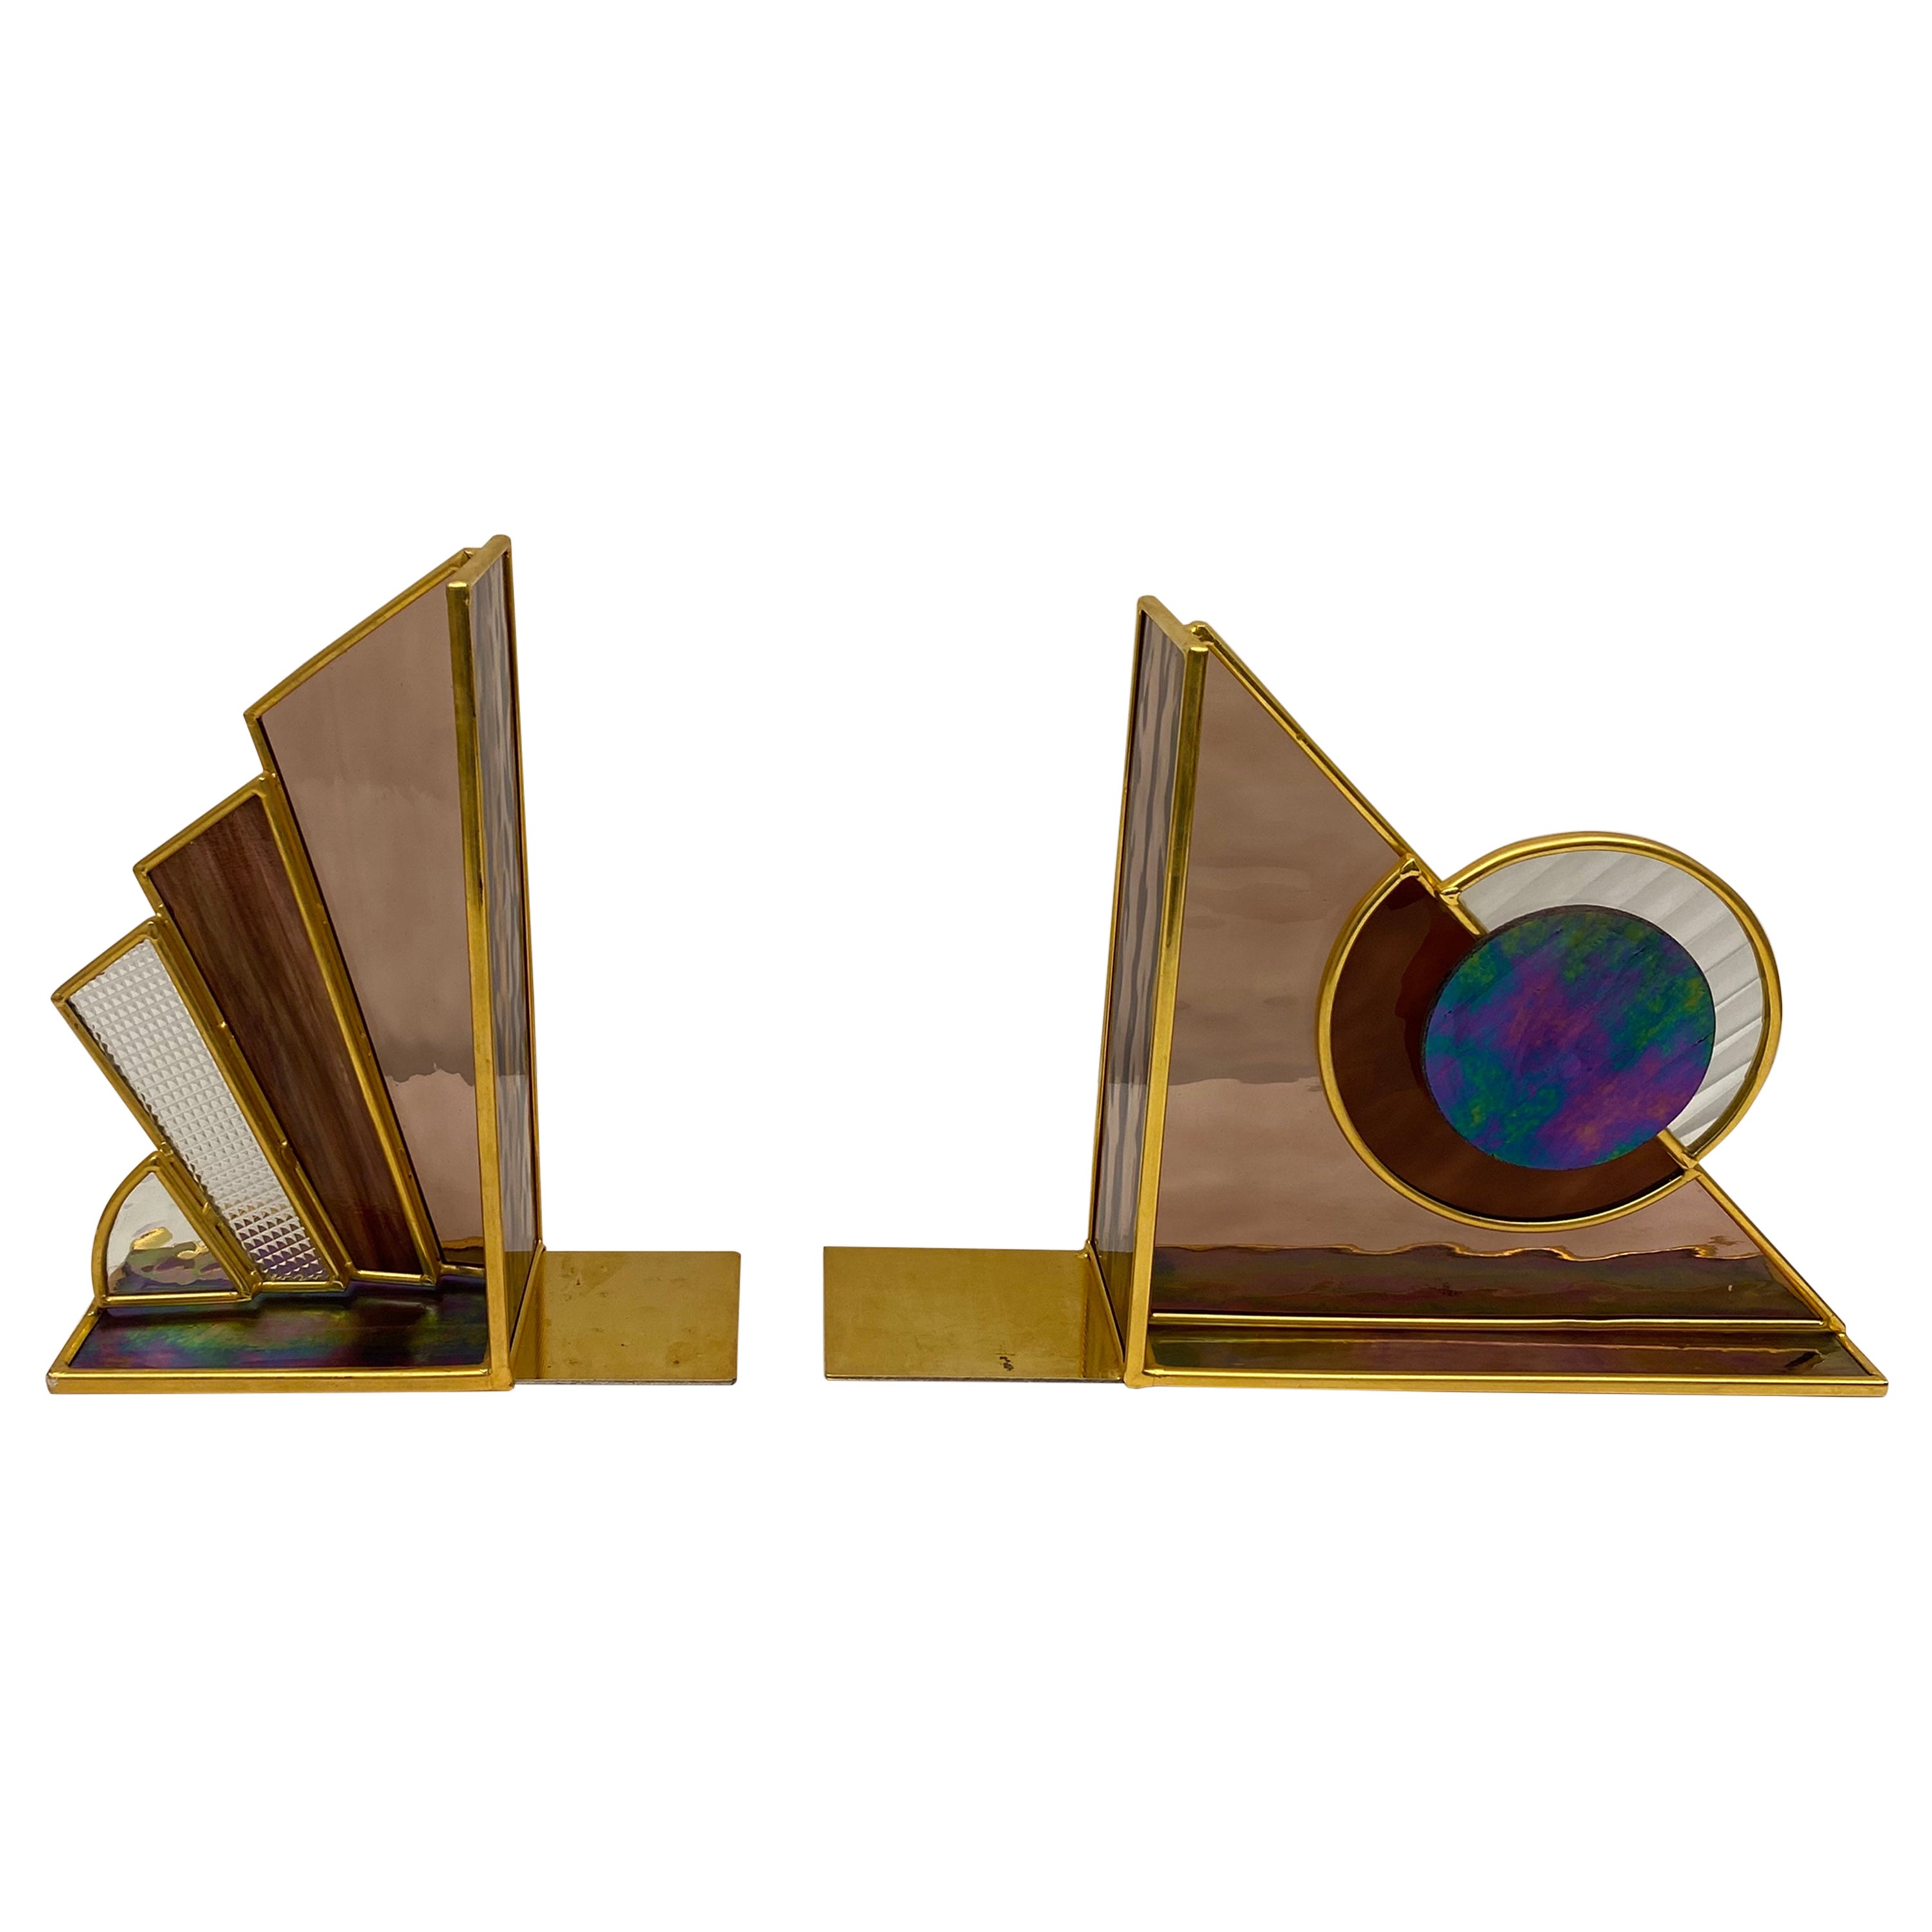 Pair of Uniquely Designed Stained Glass and Brass Bookends, Un-matching For Sale